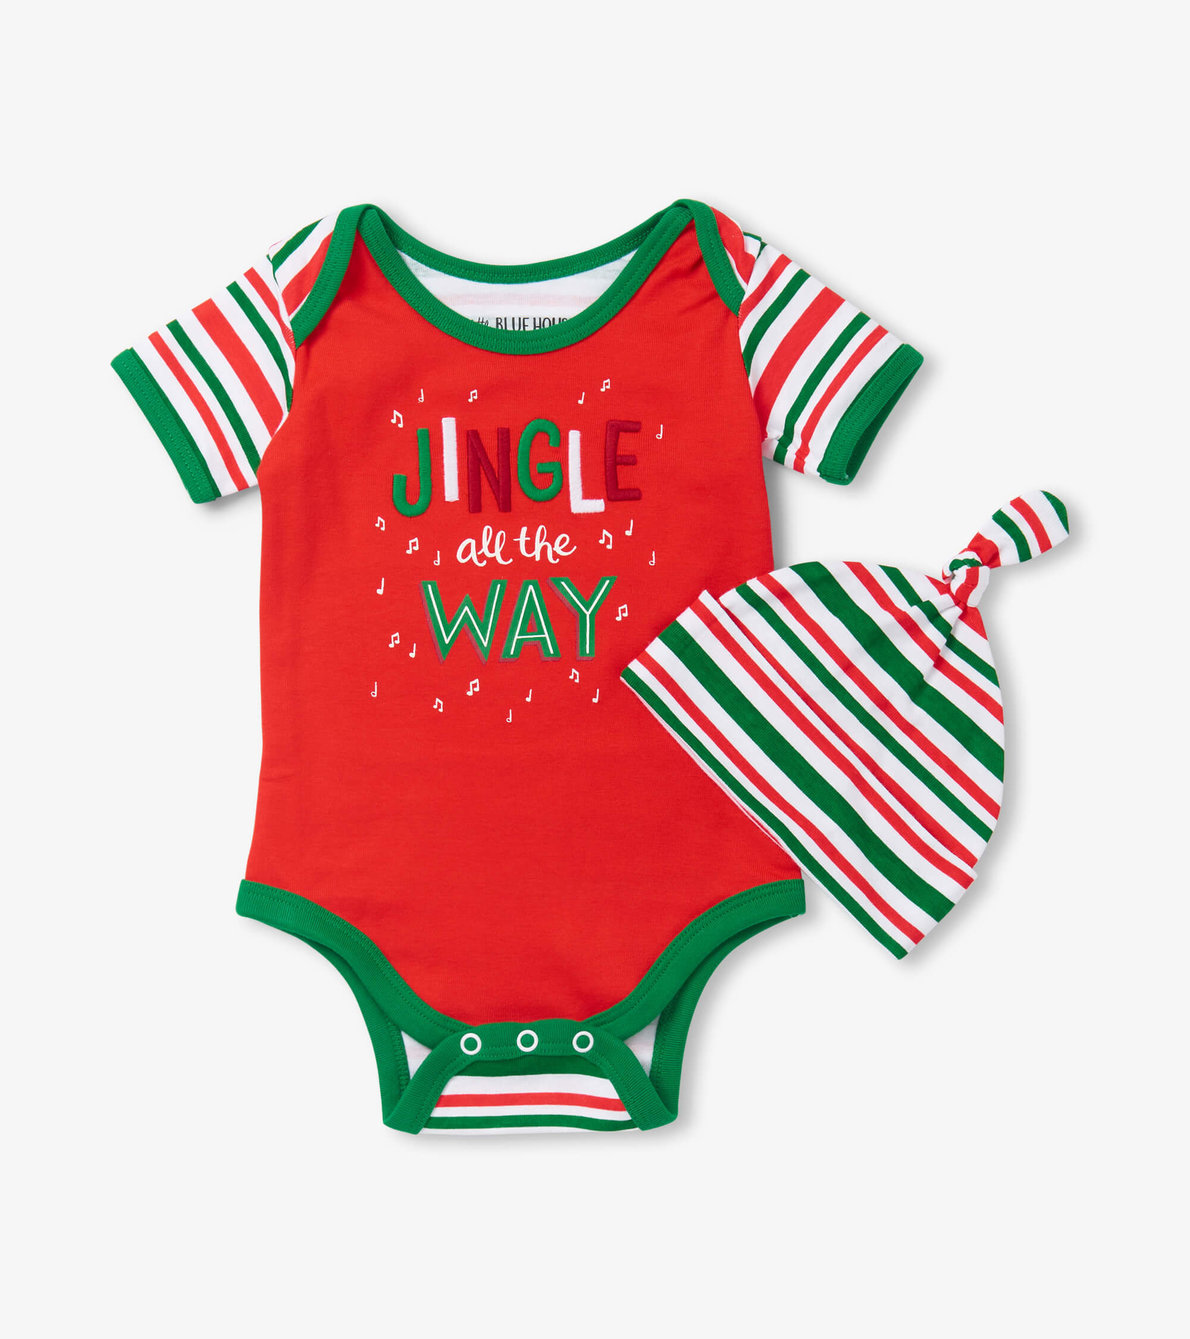 View larger image of Baby Jingle All The Way Bodysuit